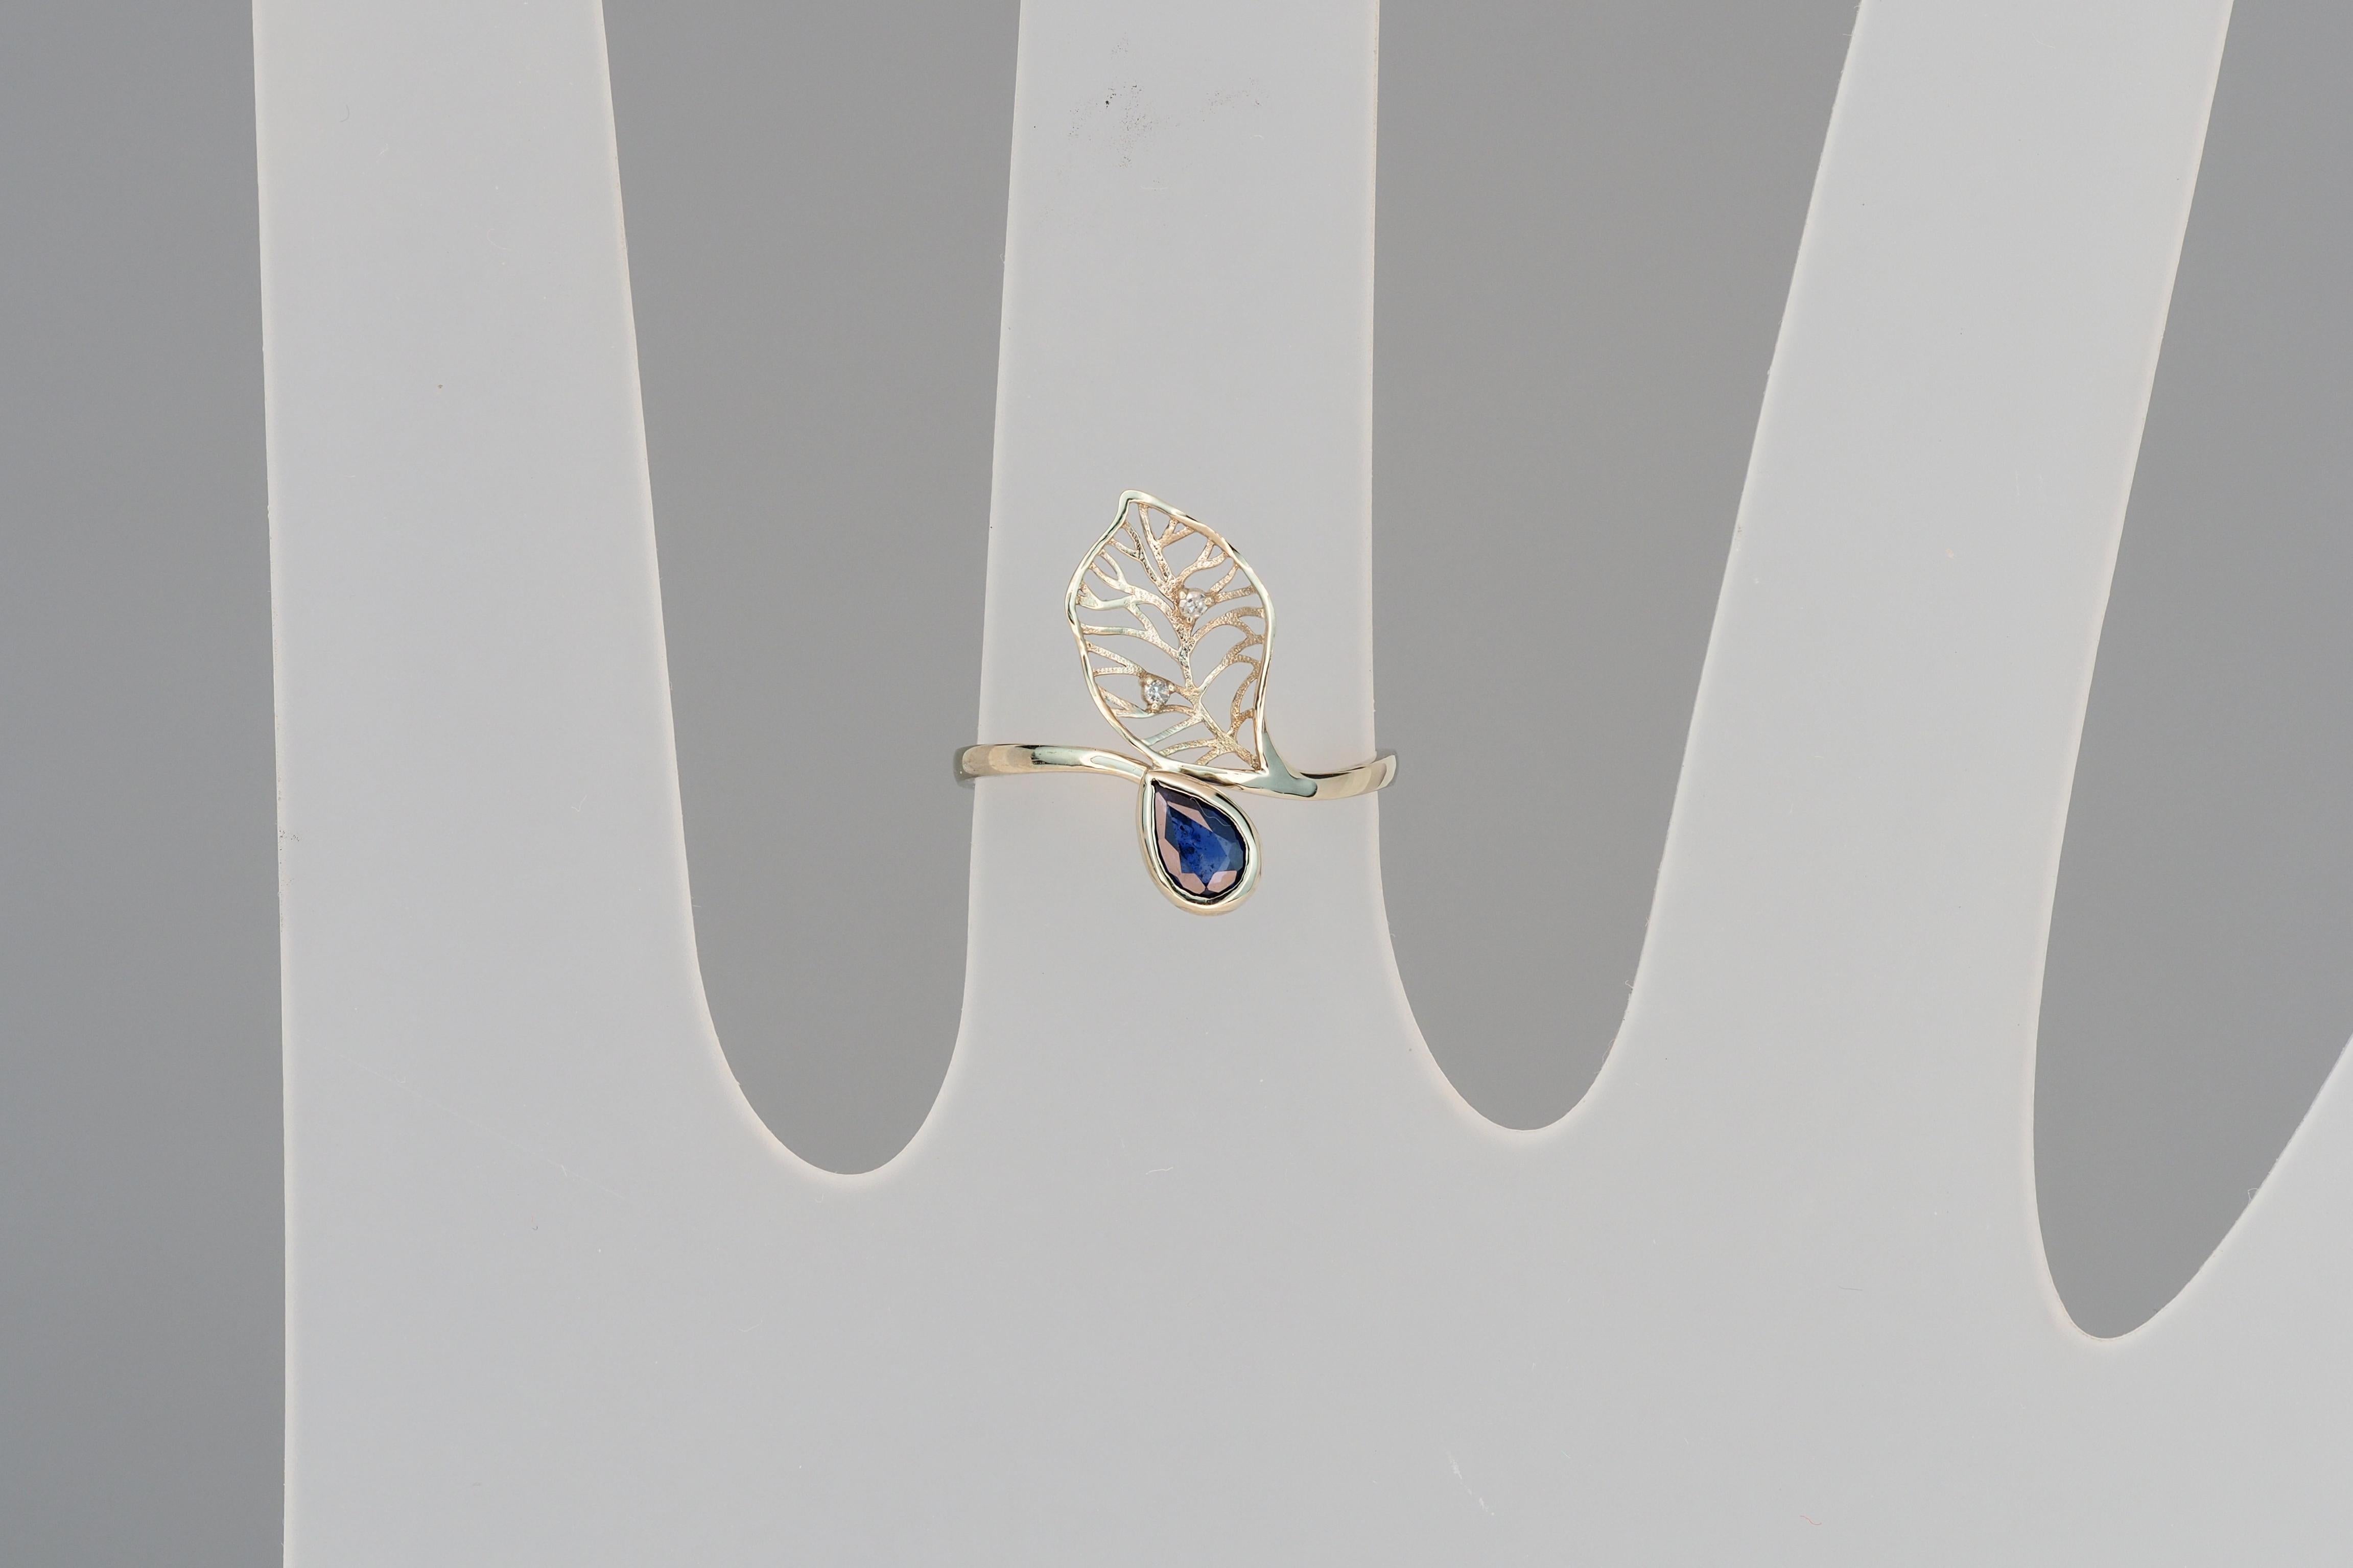 For Sale:  14 Karat Gold Ring with Sapphire and Diamonds. Floral Design Ring with Sapphire 8